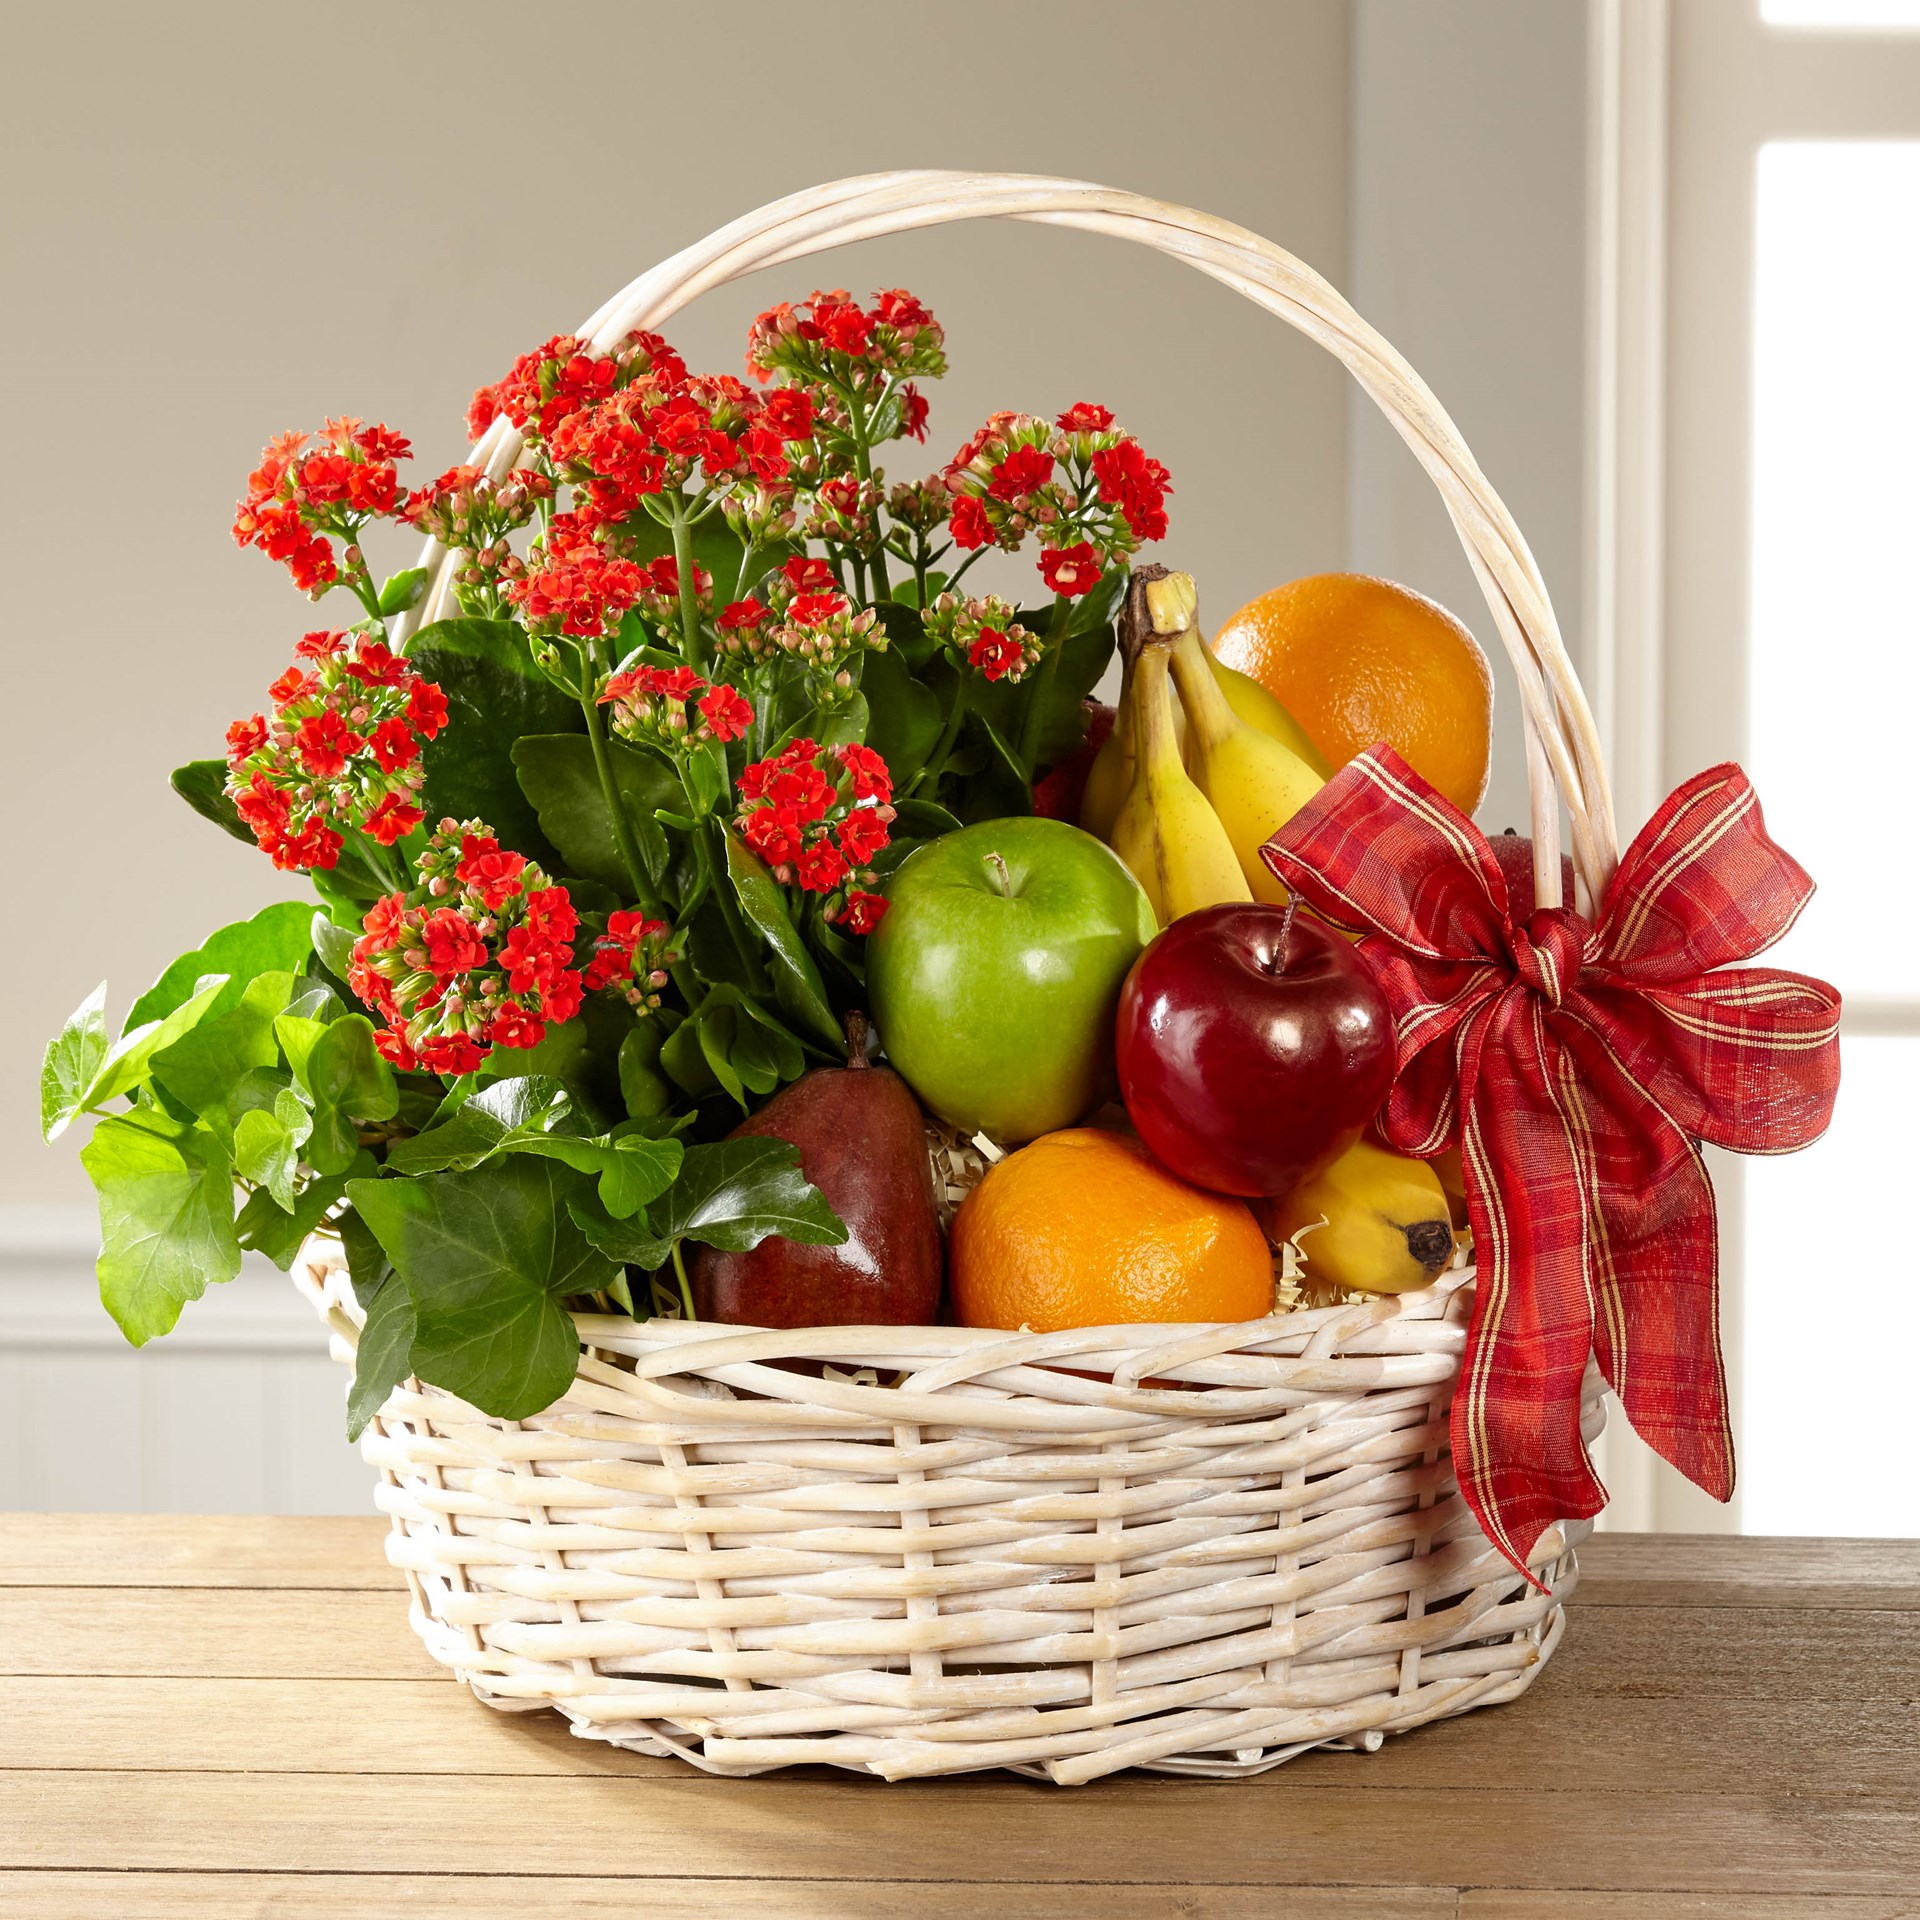 product image for The FTD Garden's Paradise Basket